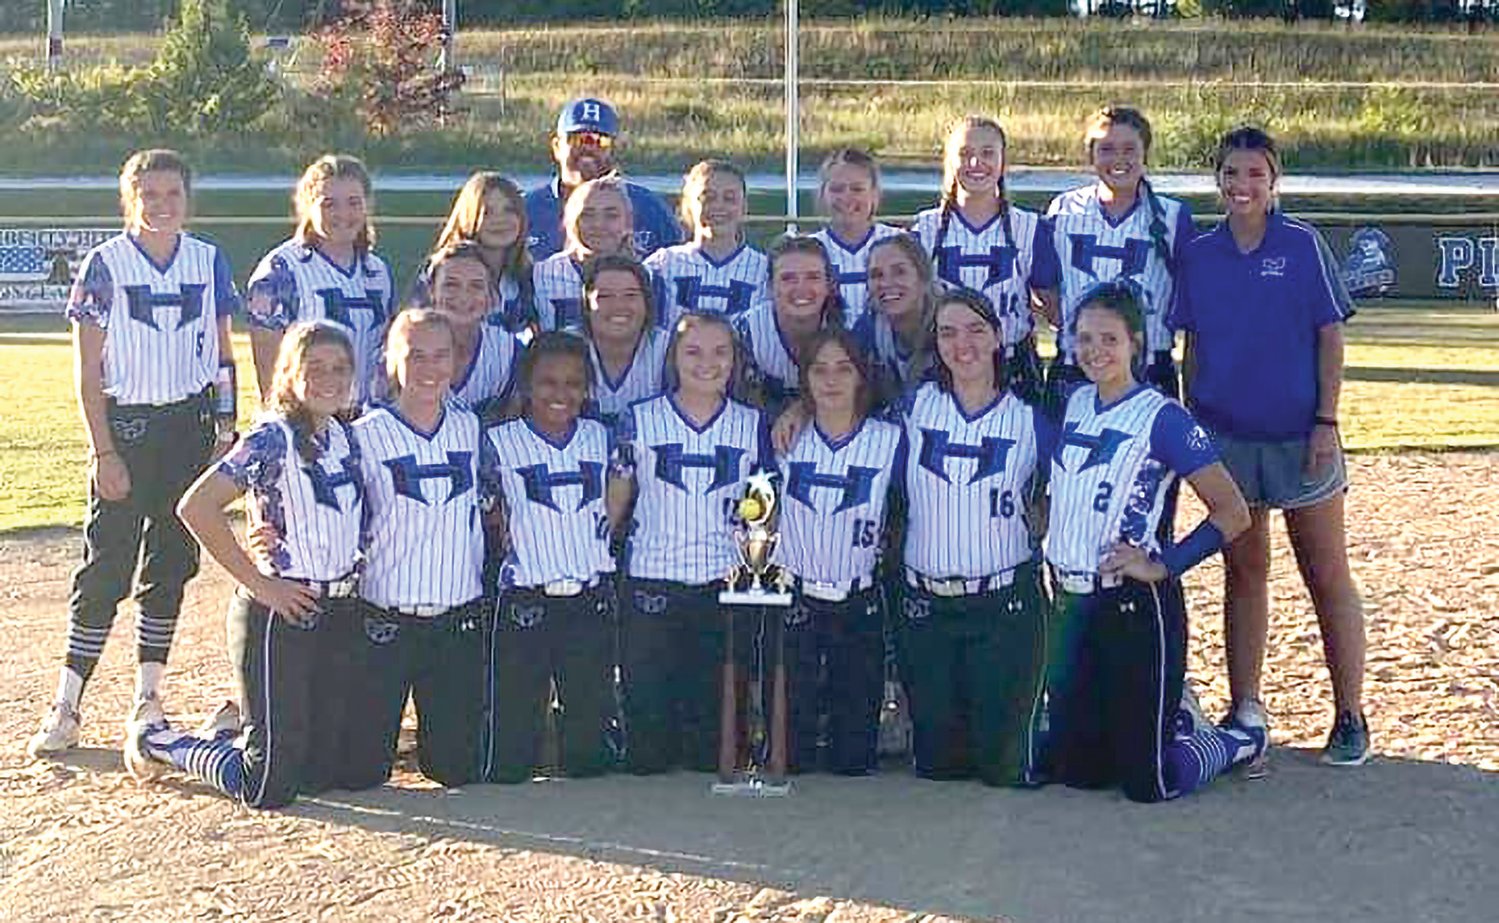 The Hartville Lady Eagles softball team after winning first place in the Family Pharmacy Tournament held in Norwood.